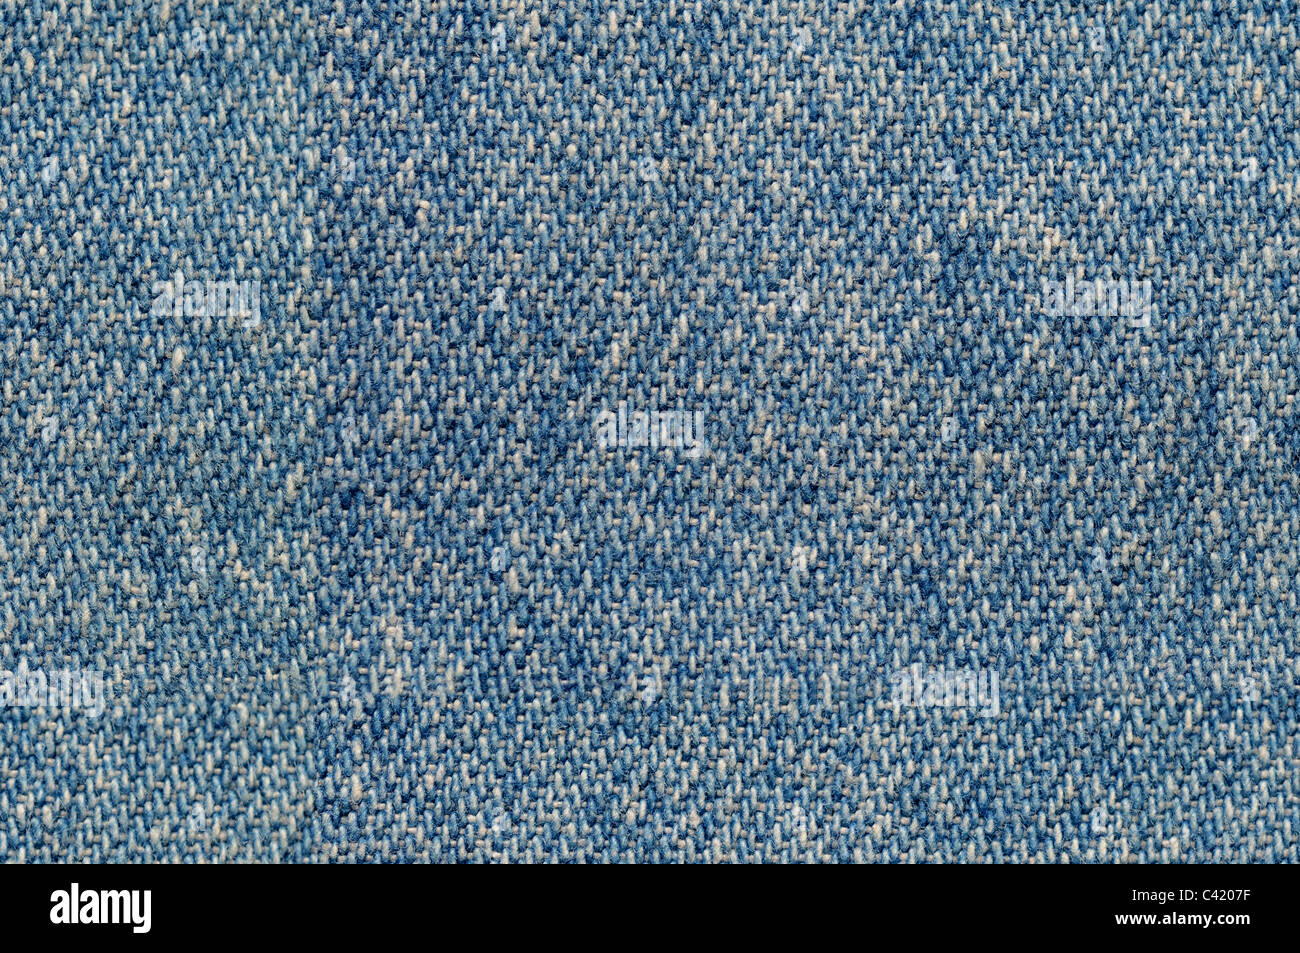 Blue denim cloth fabric background seamlessly tileable Stock Photo